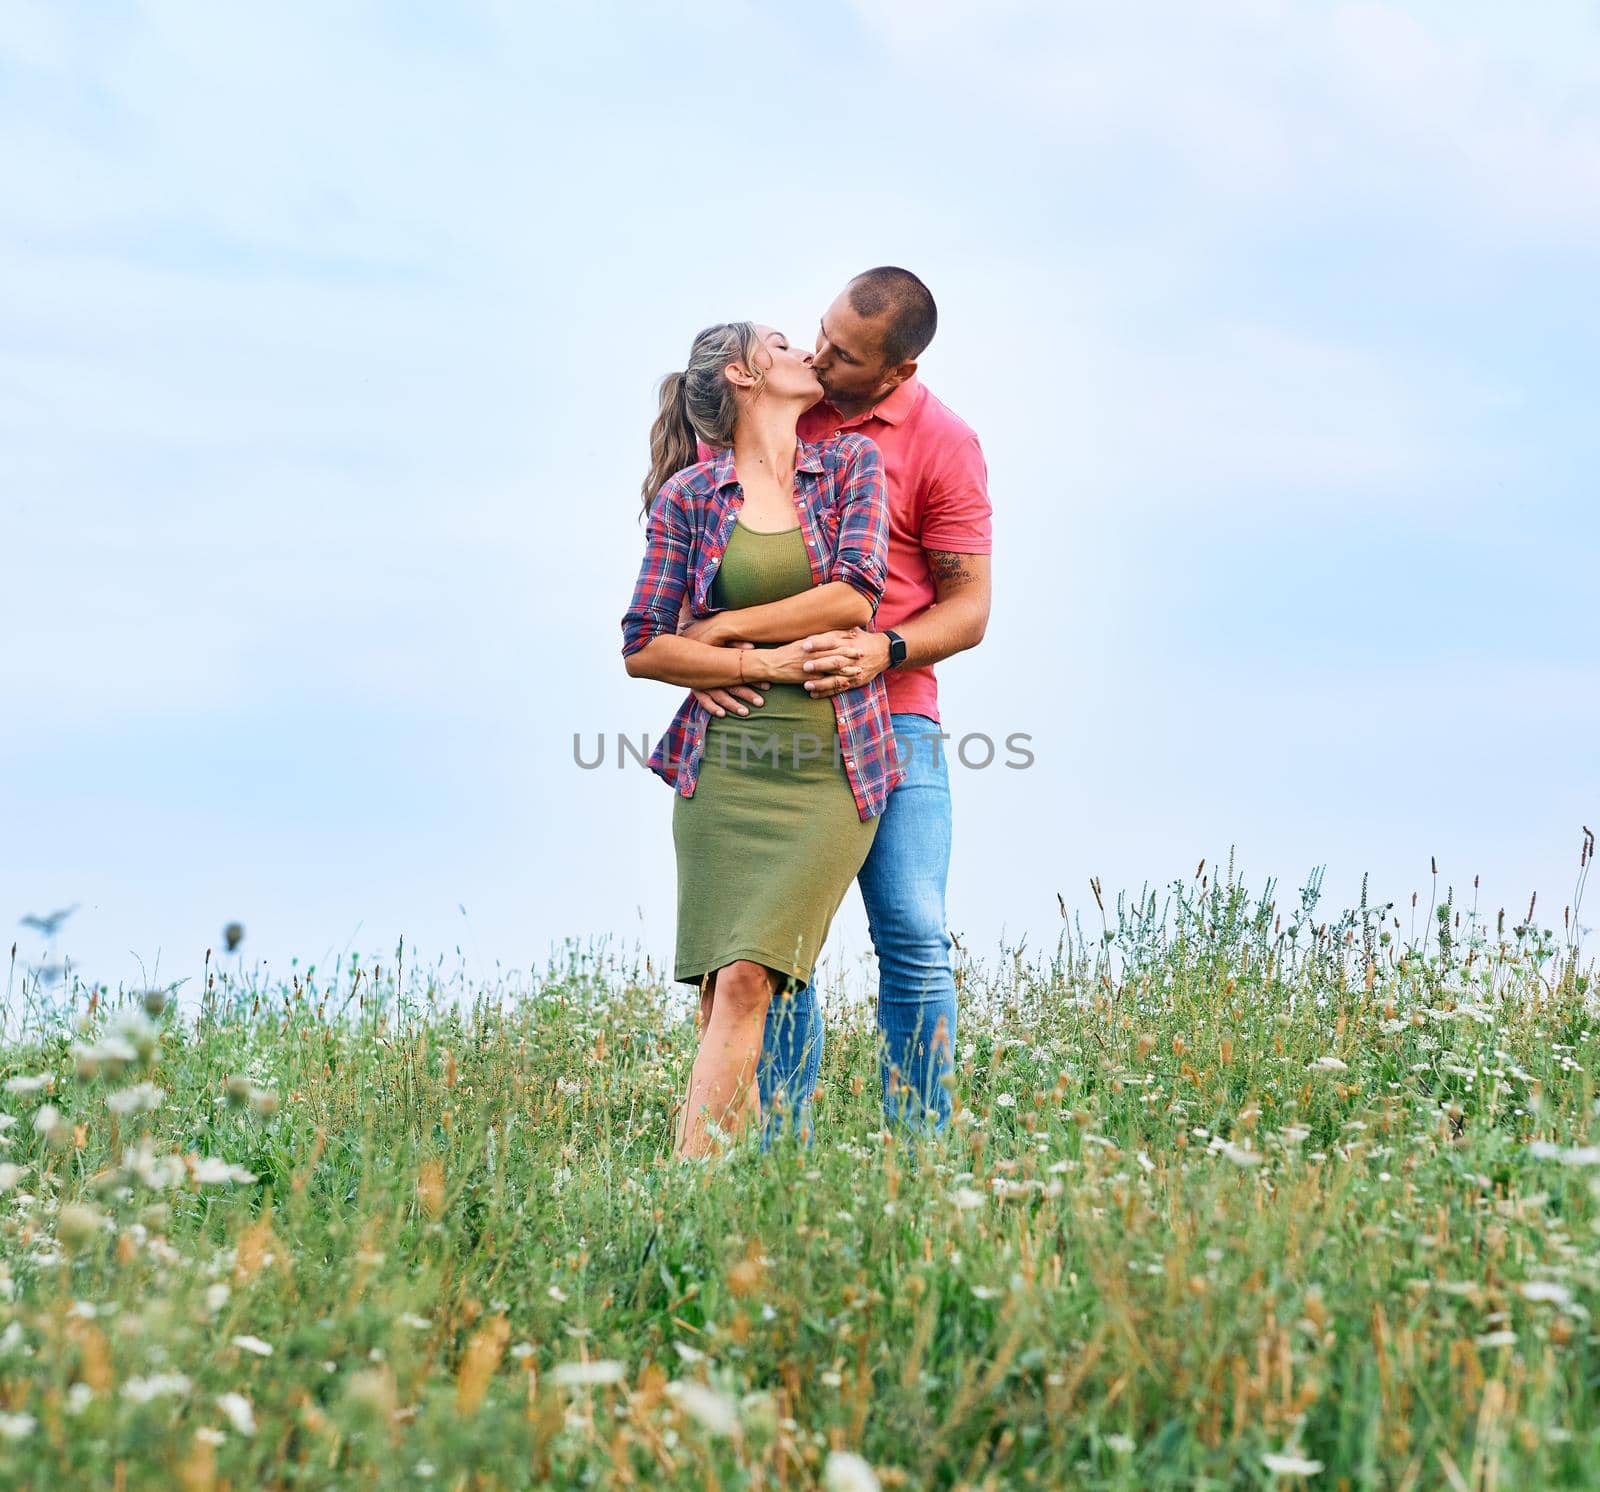 woman outdoor man couple lifestyle love nature happy summer together happiness kiss female male by Picsfive